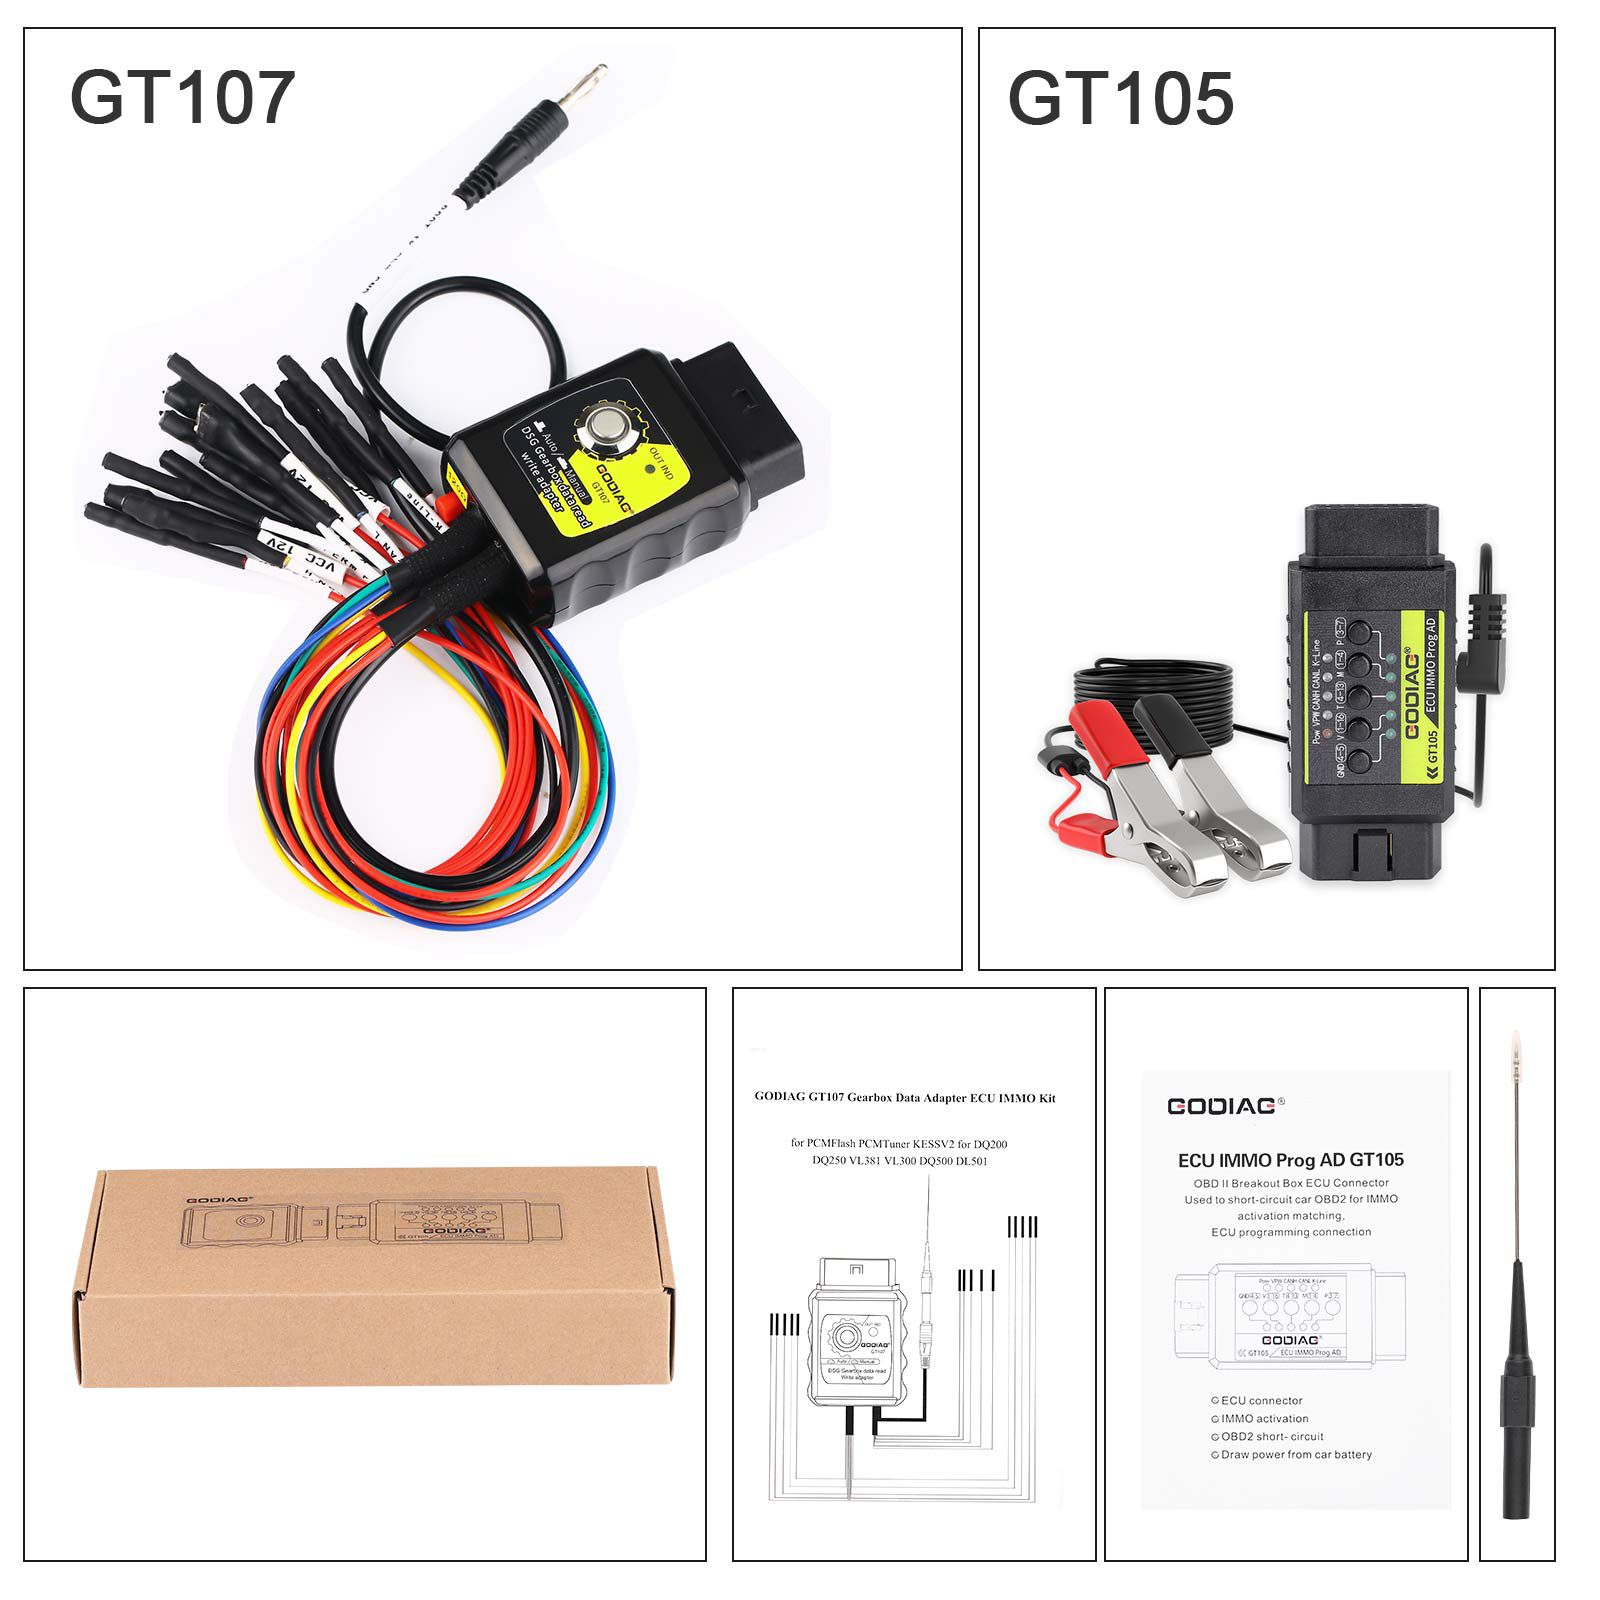 PCMtuner ECU Programmer 67 Modules in 1 + GODIAG GT107 DSG Gearbox Data Read/Write Adapter with GT105 + Breakout Tricore Cable